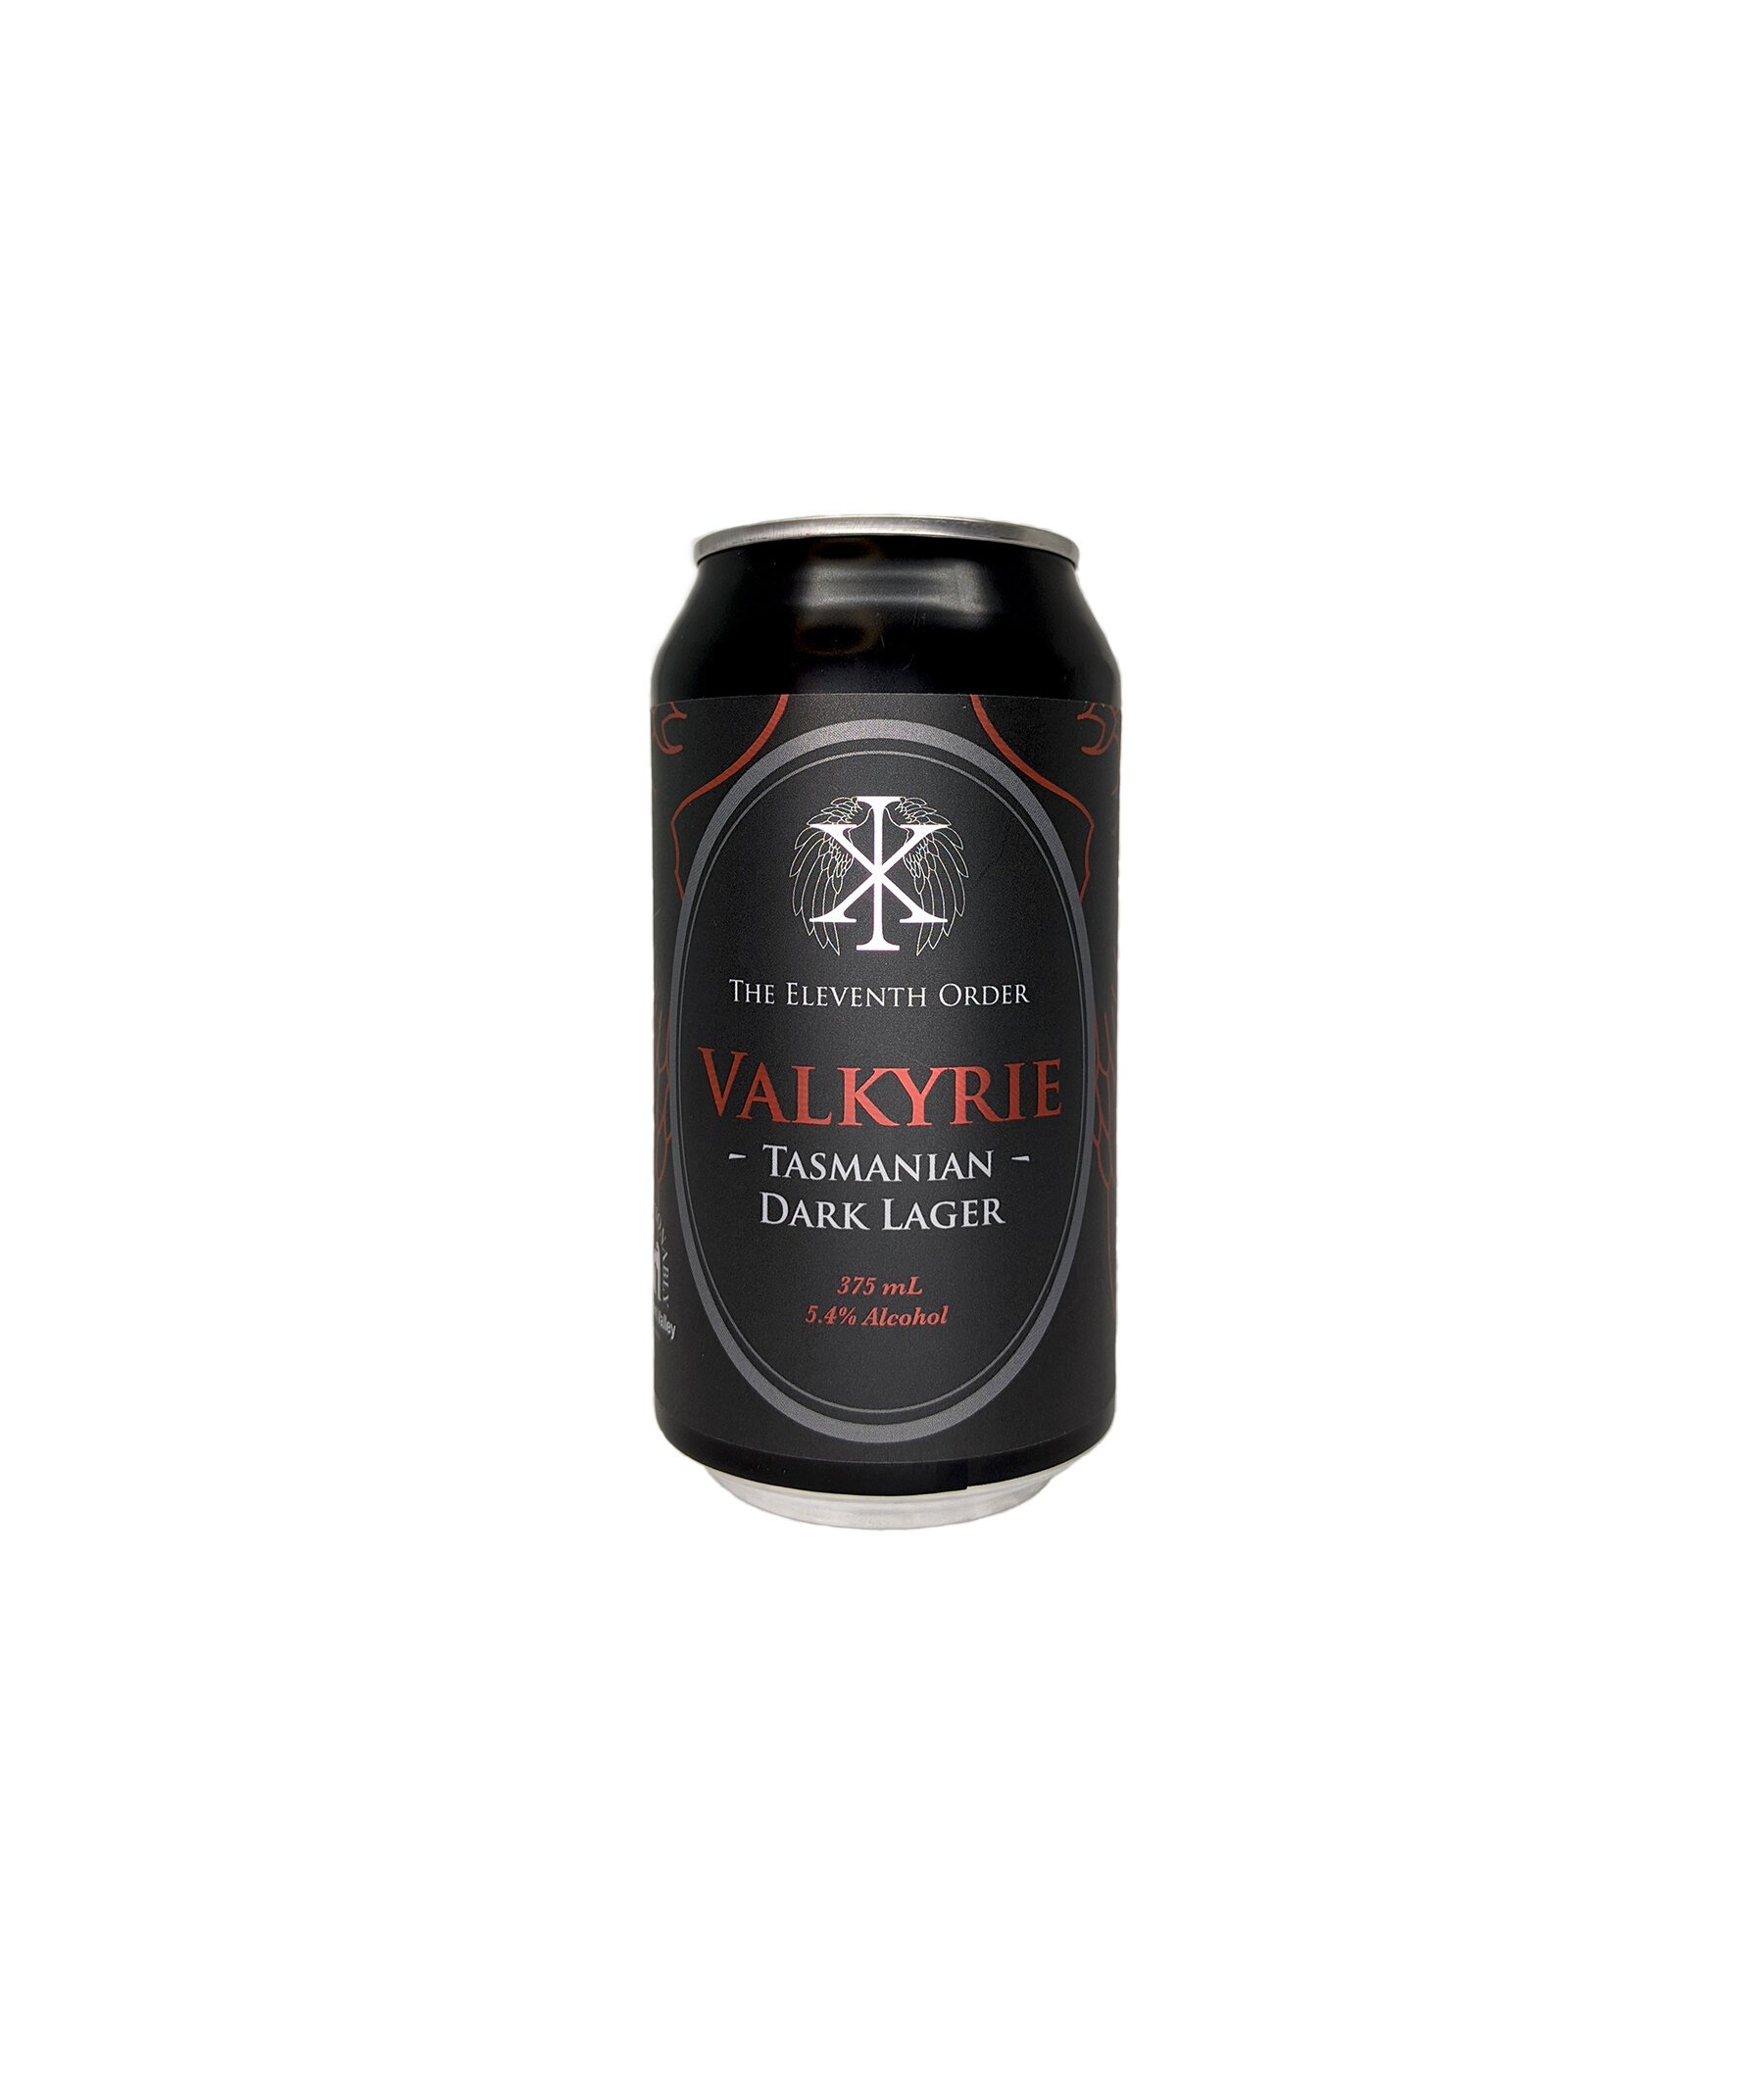 the-eleventh-order-dark-lager-valkyrie-can-1800w.jpg